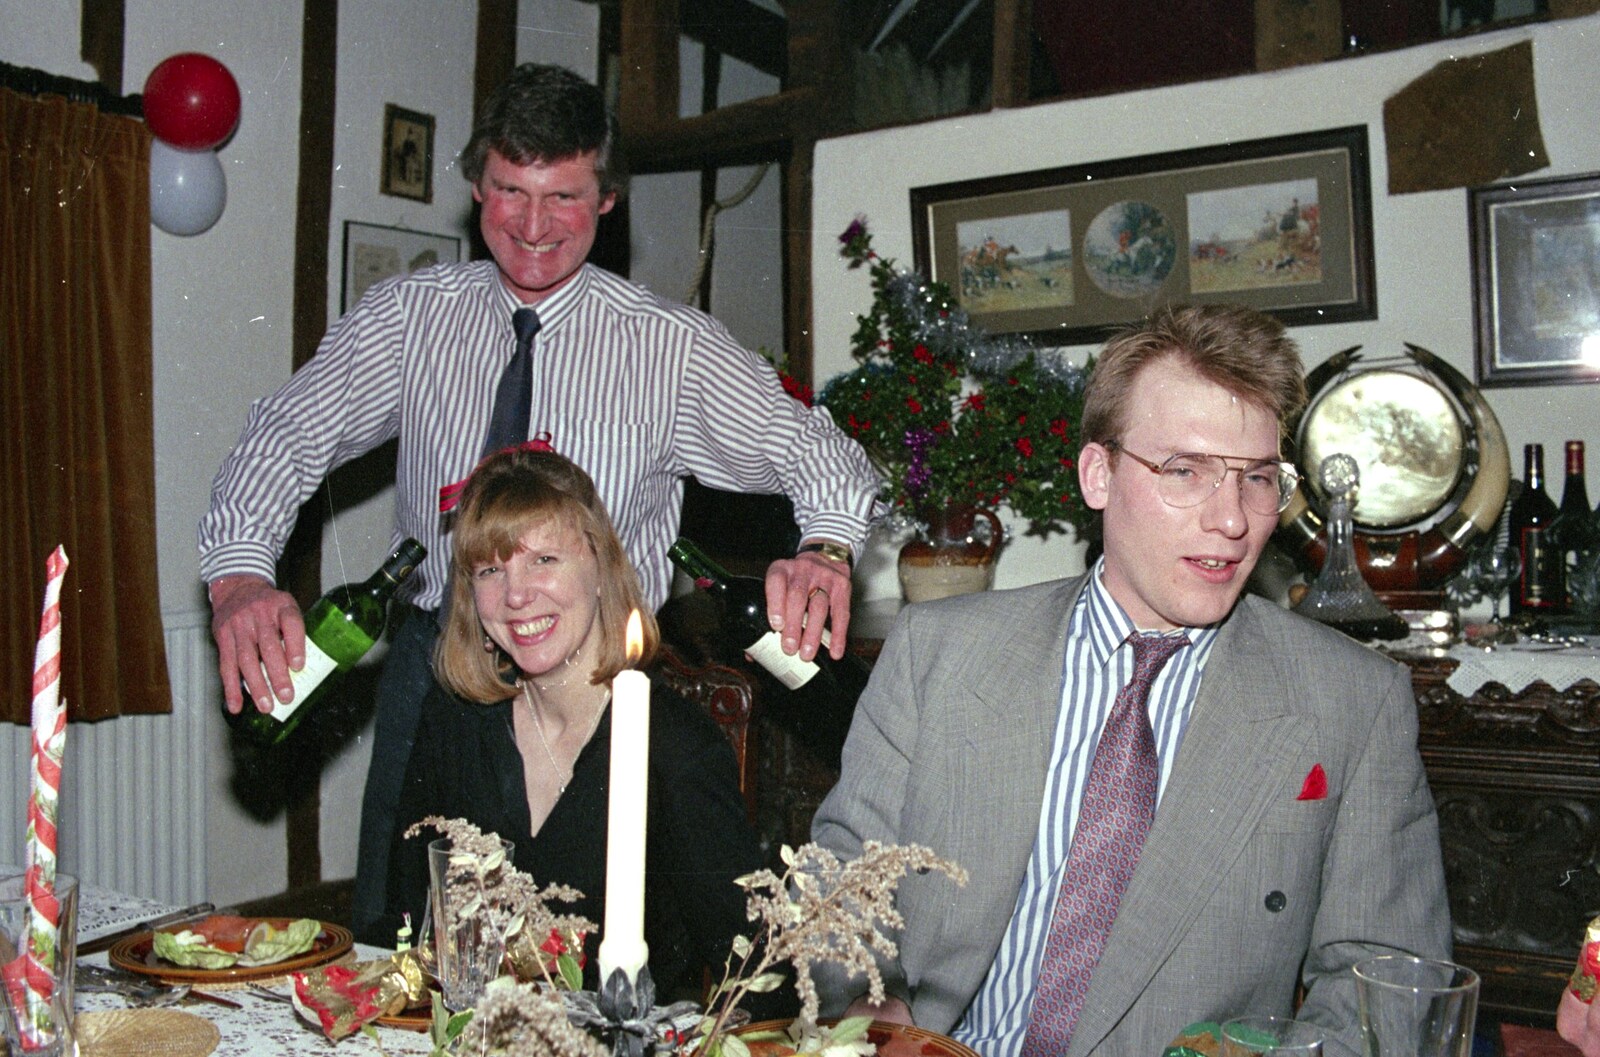 Geoff sticks bottles of wine in Janet's ears from Christmas Dinner with Geoff and Brenda, Stuston, Suffolk - 25th December 1990